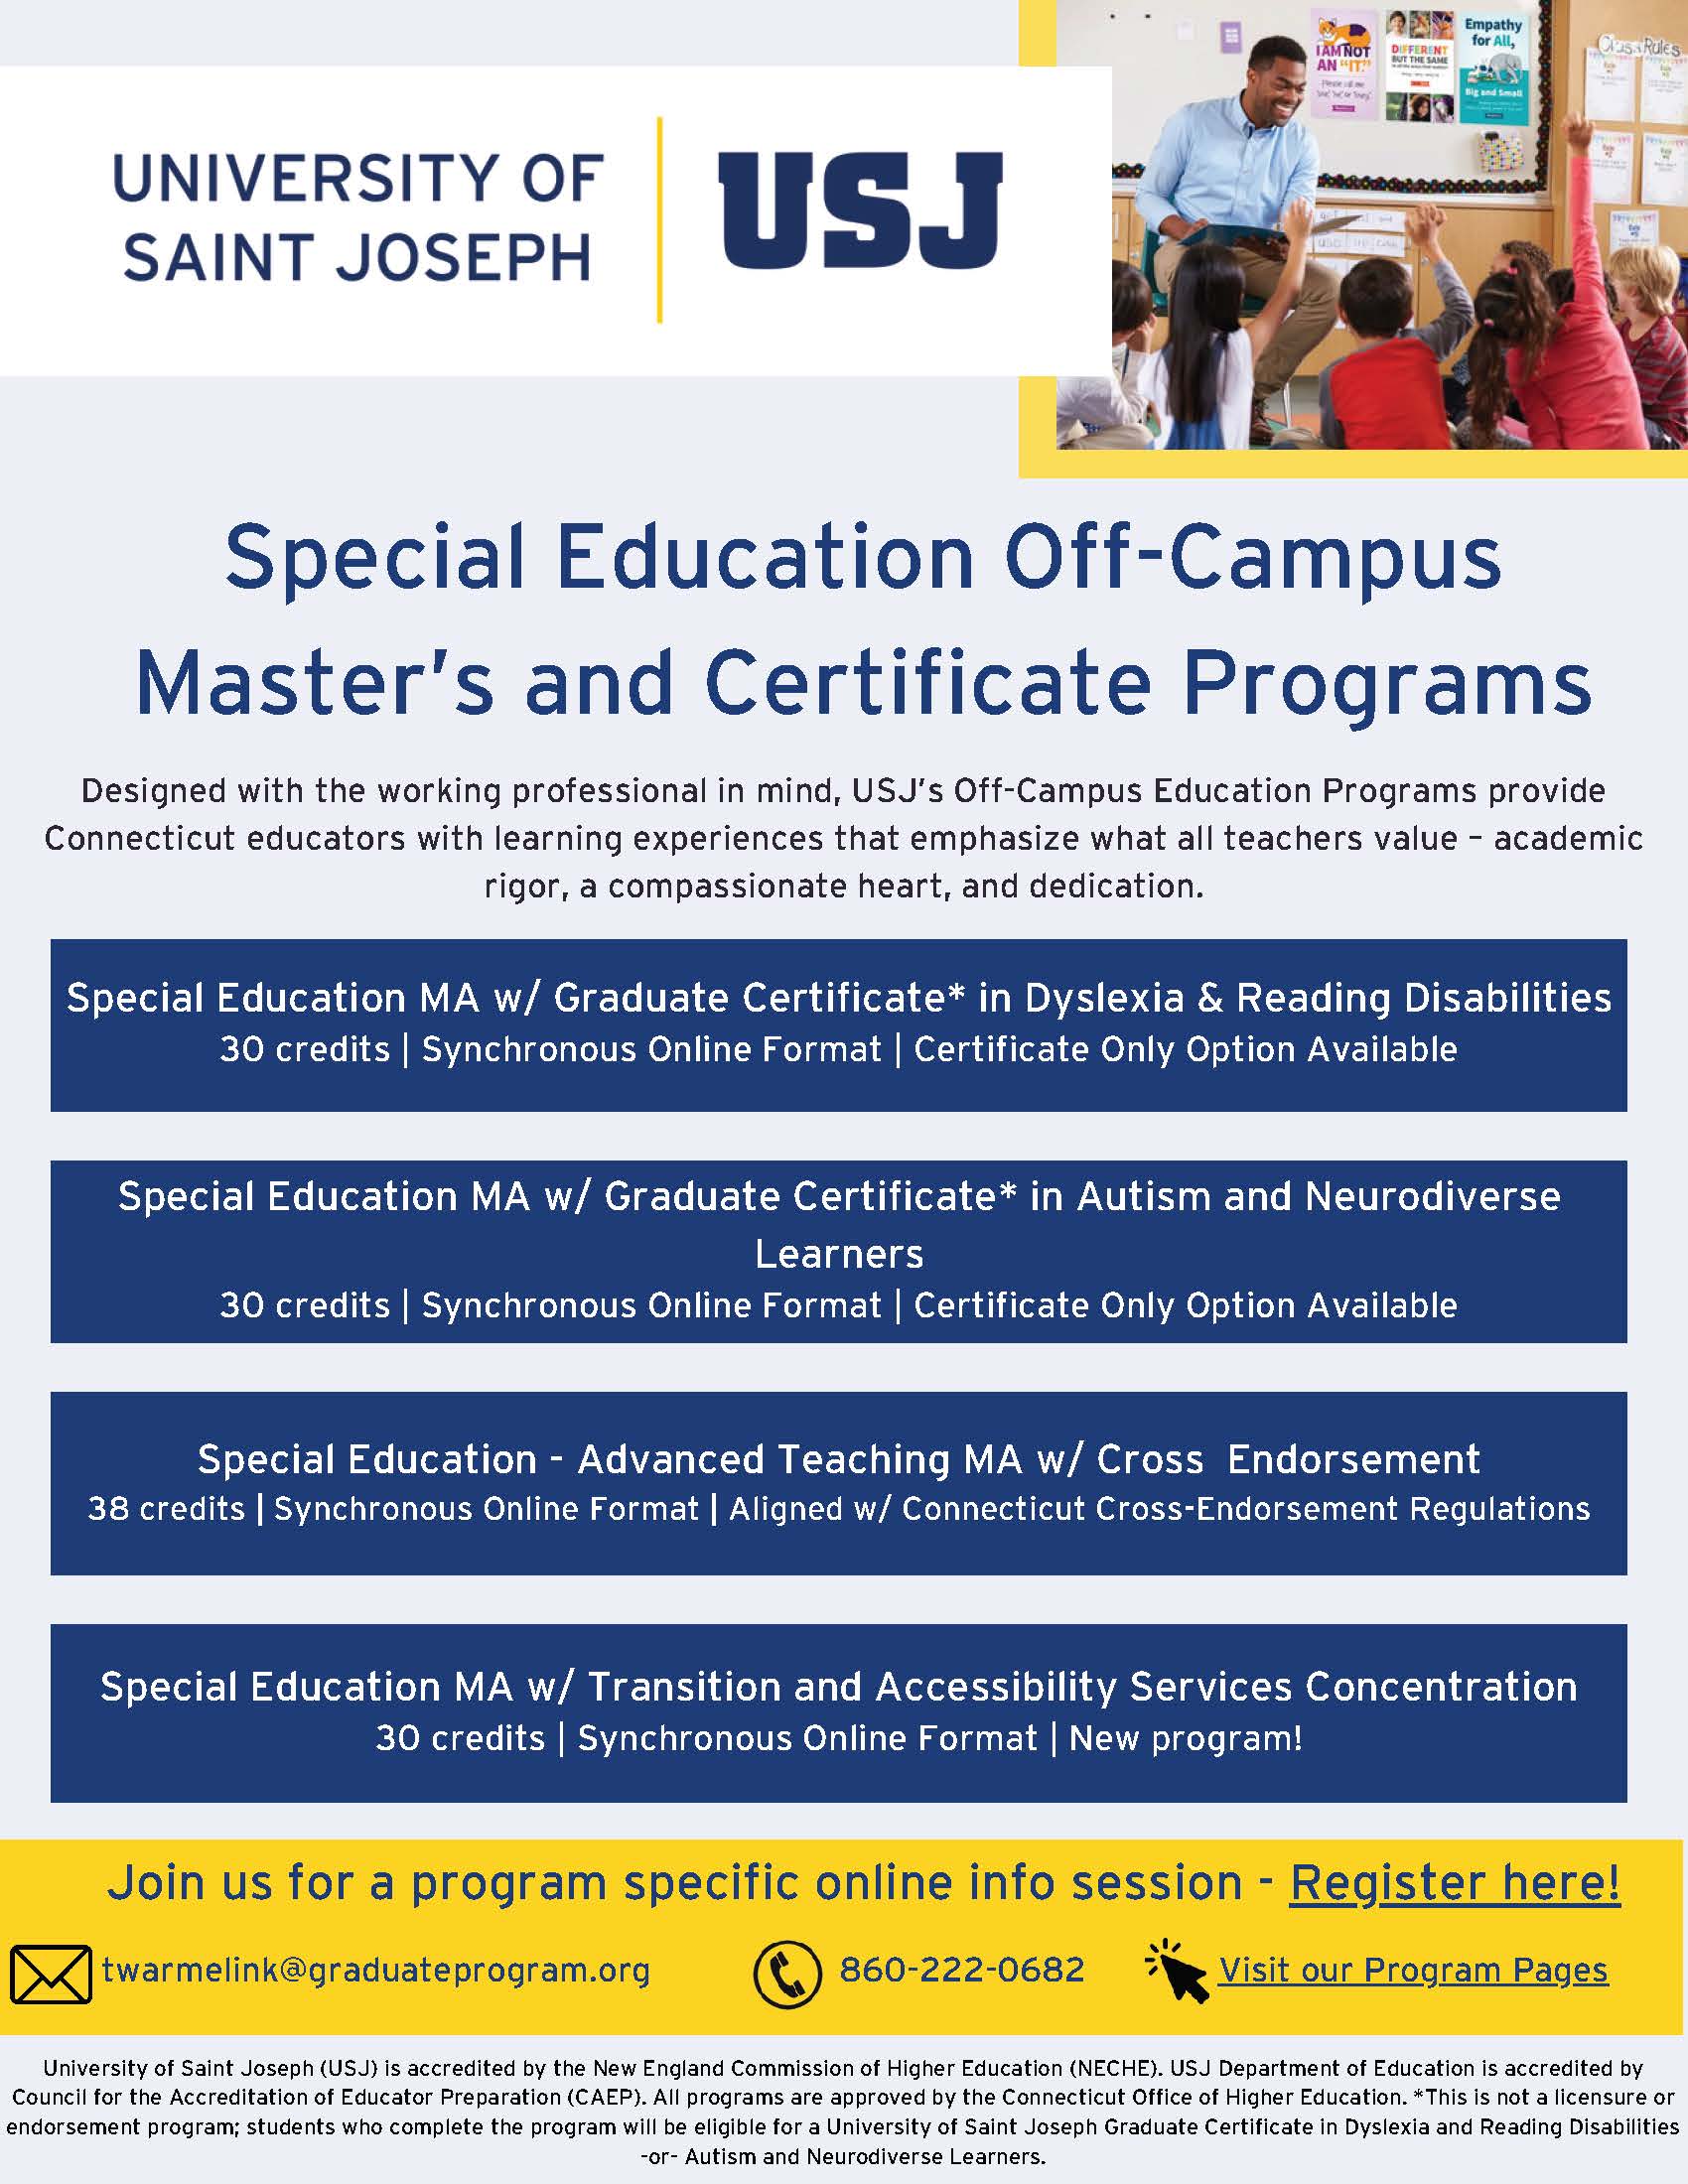 University of Saint Joseph - Special Education Off-Campus - Master’s and Certificate Programs